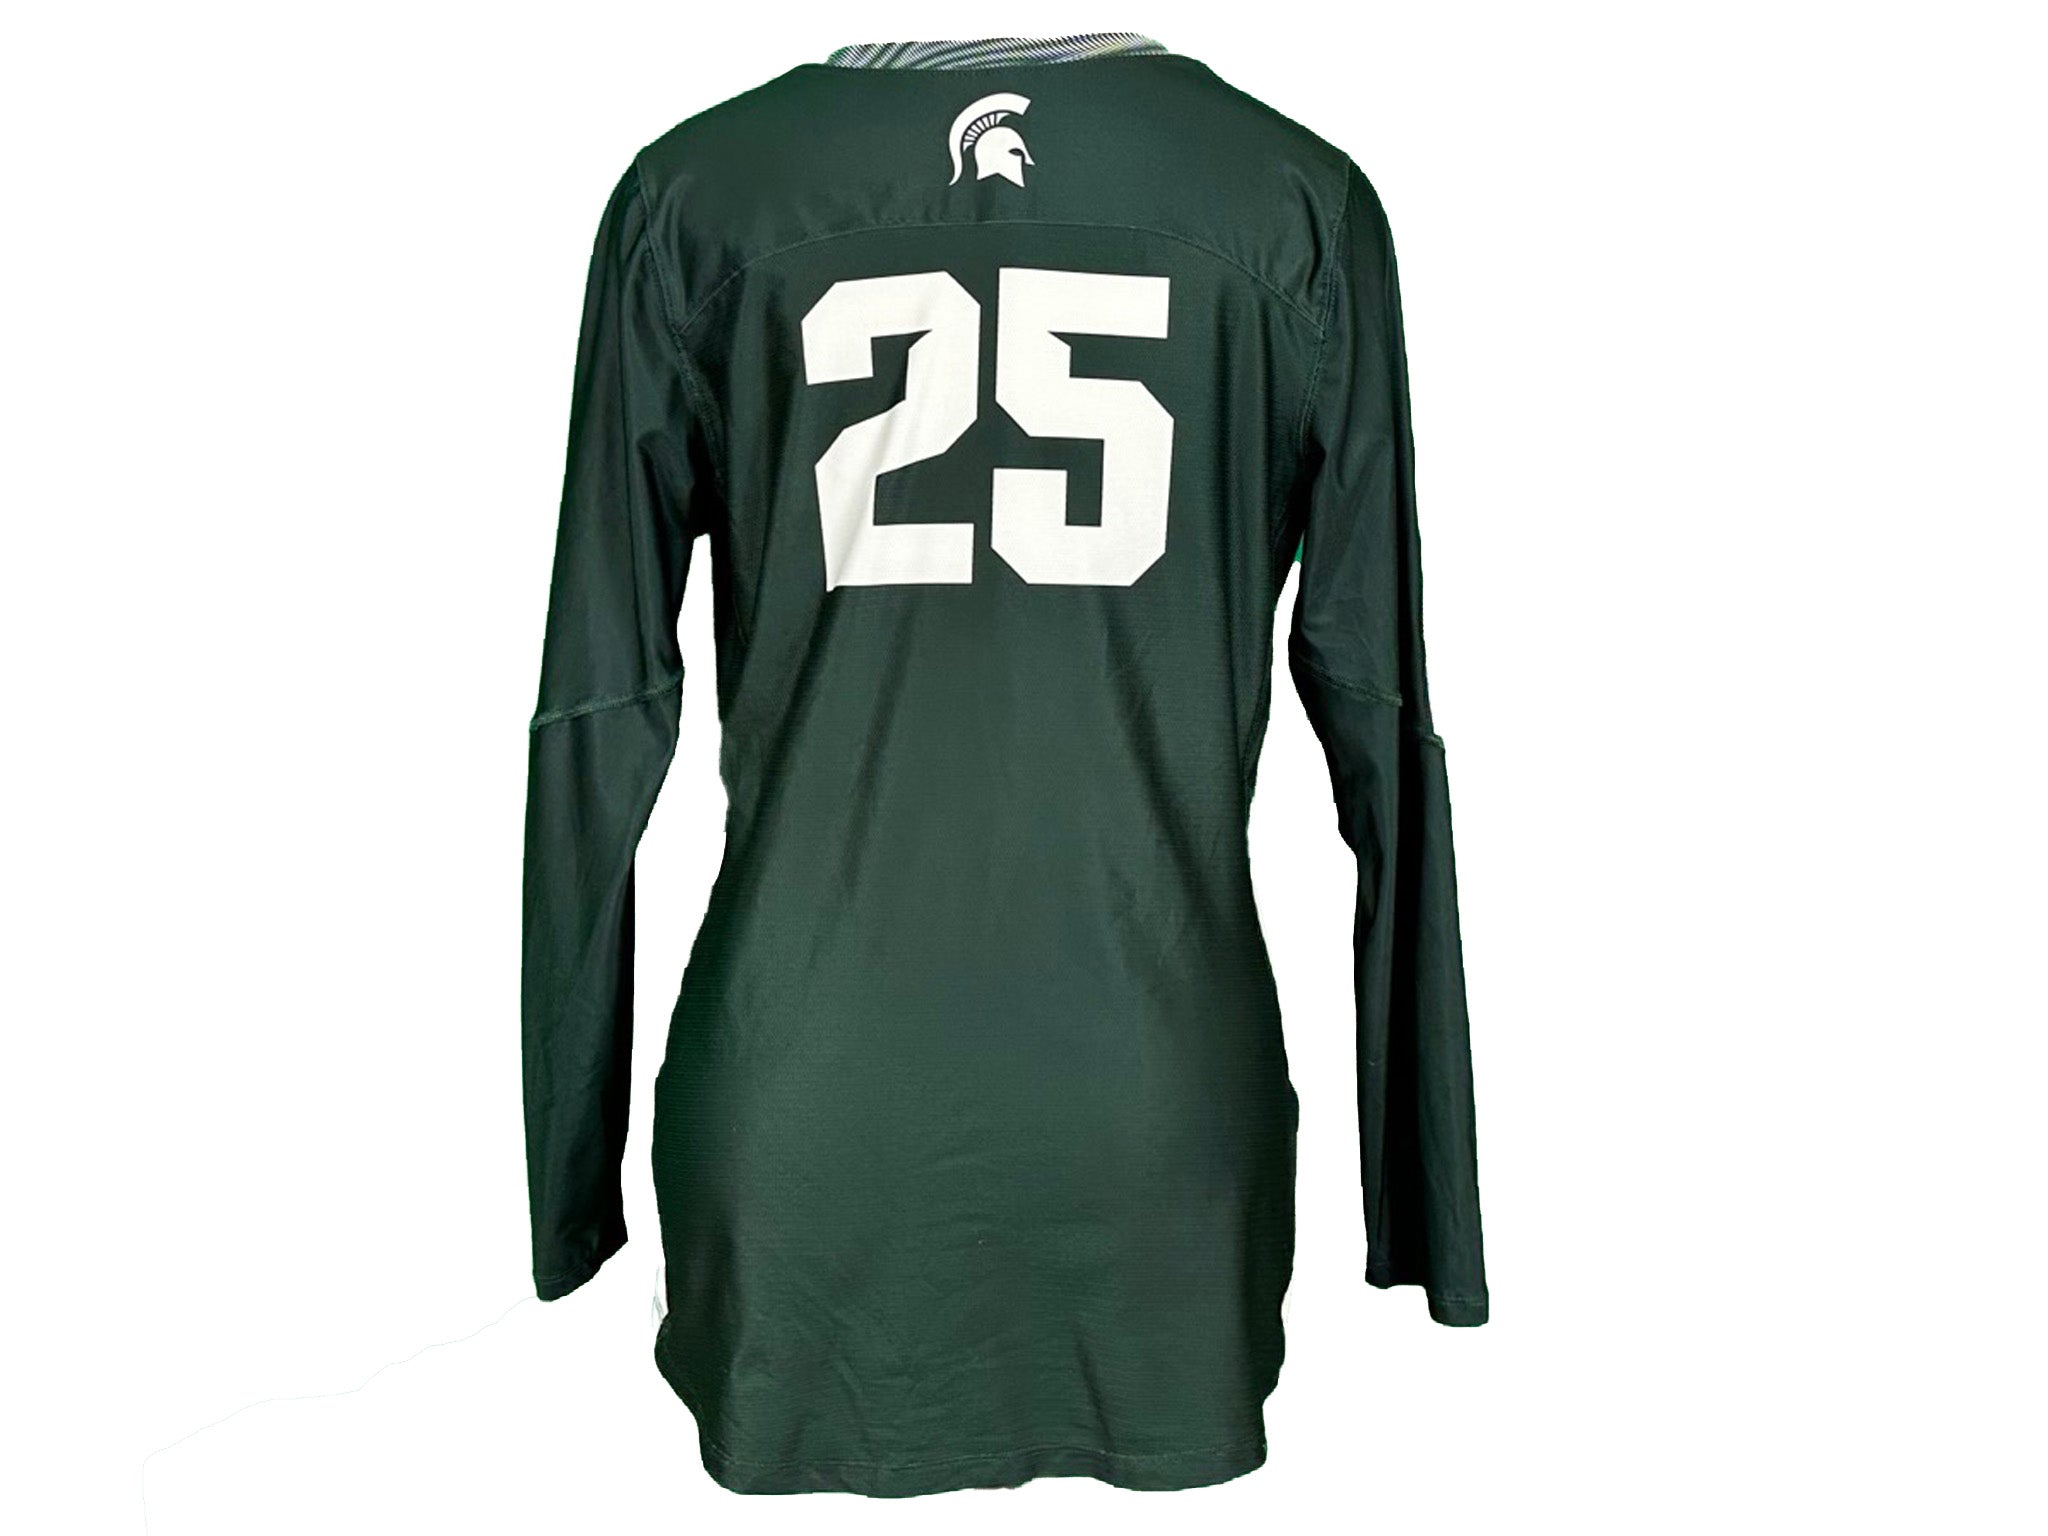 Nike Green 2018-2021 Long Sleeve Volleyball Jersey #25 w/ Patch Women's Size L